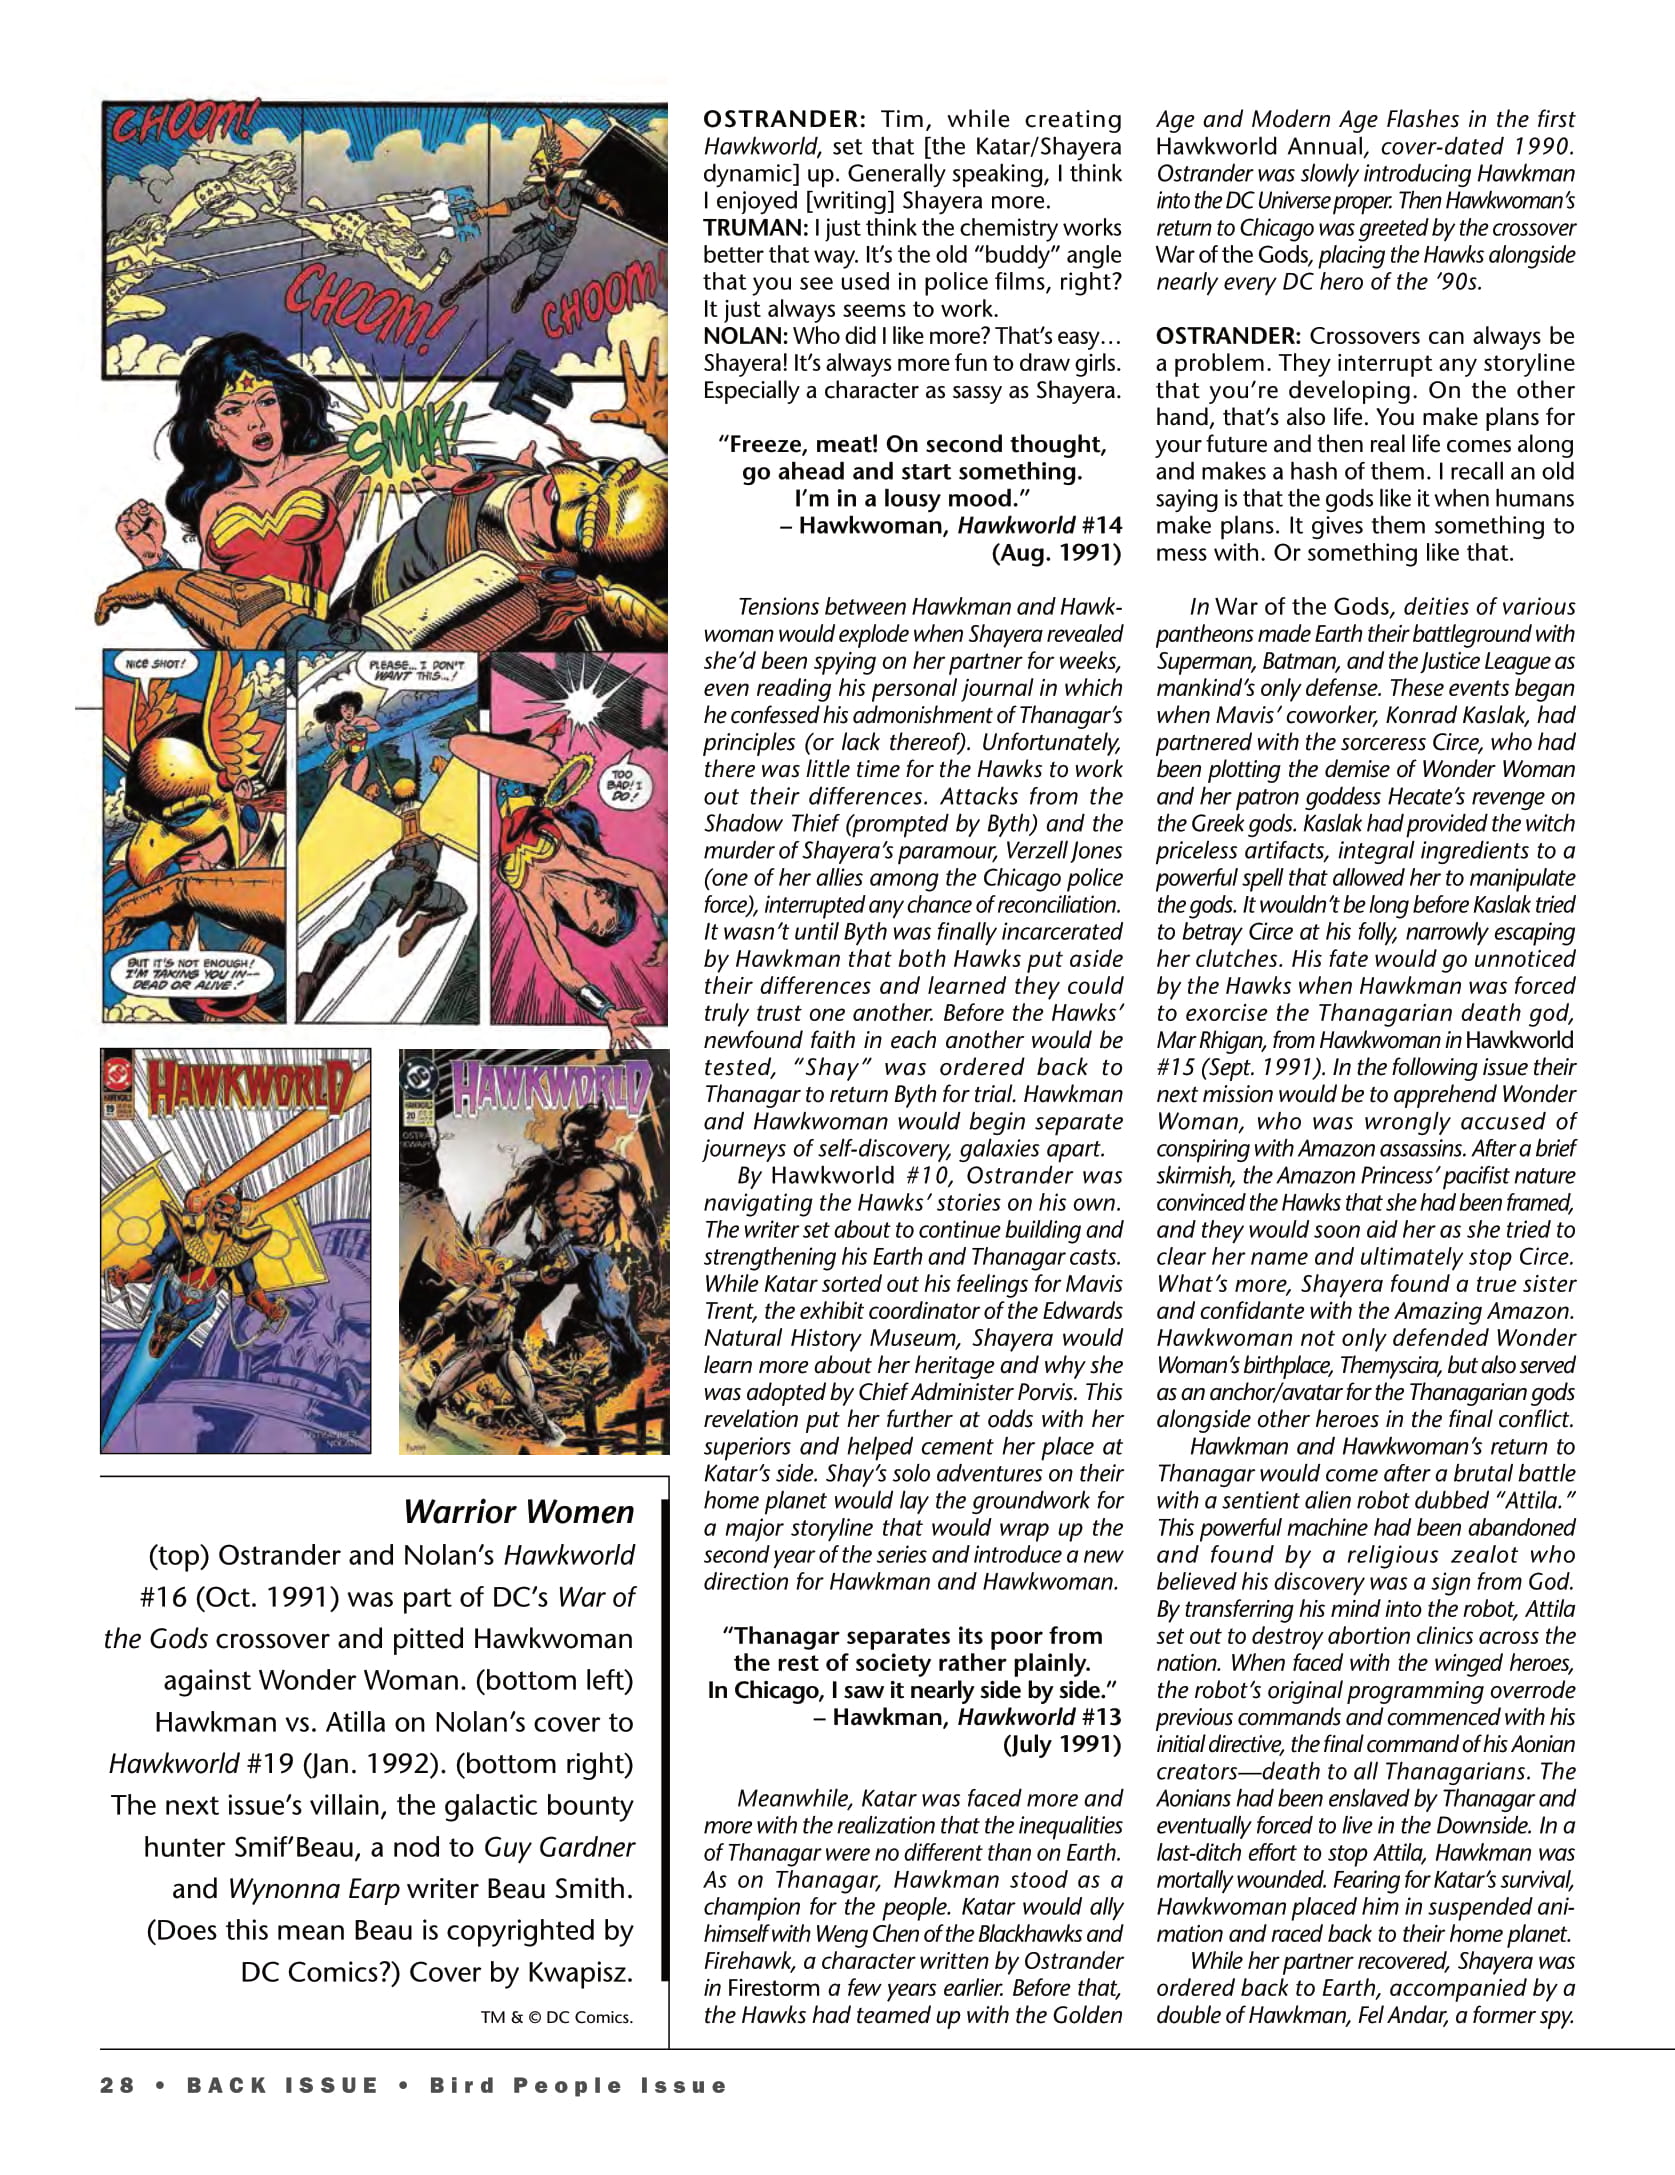 Read online Back Issue comic -  Issue #97 - 30